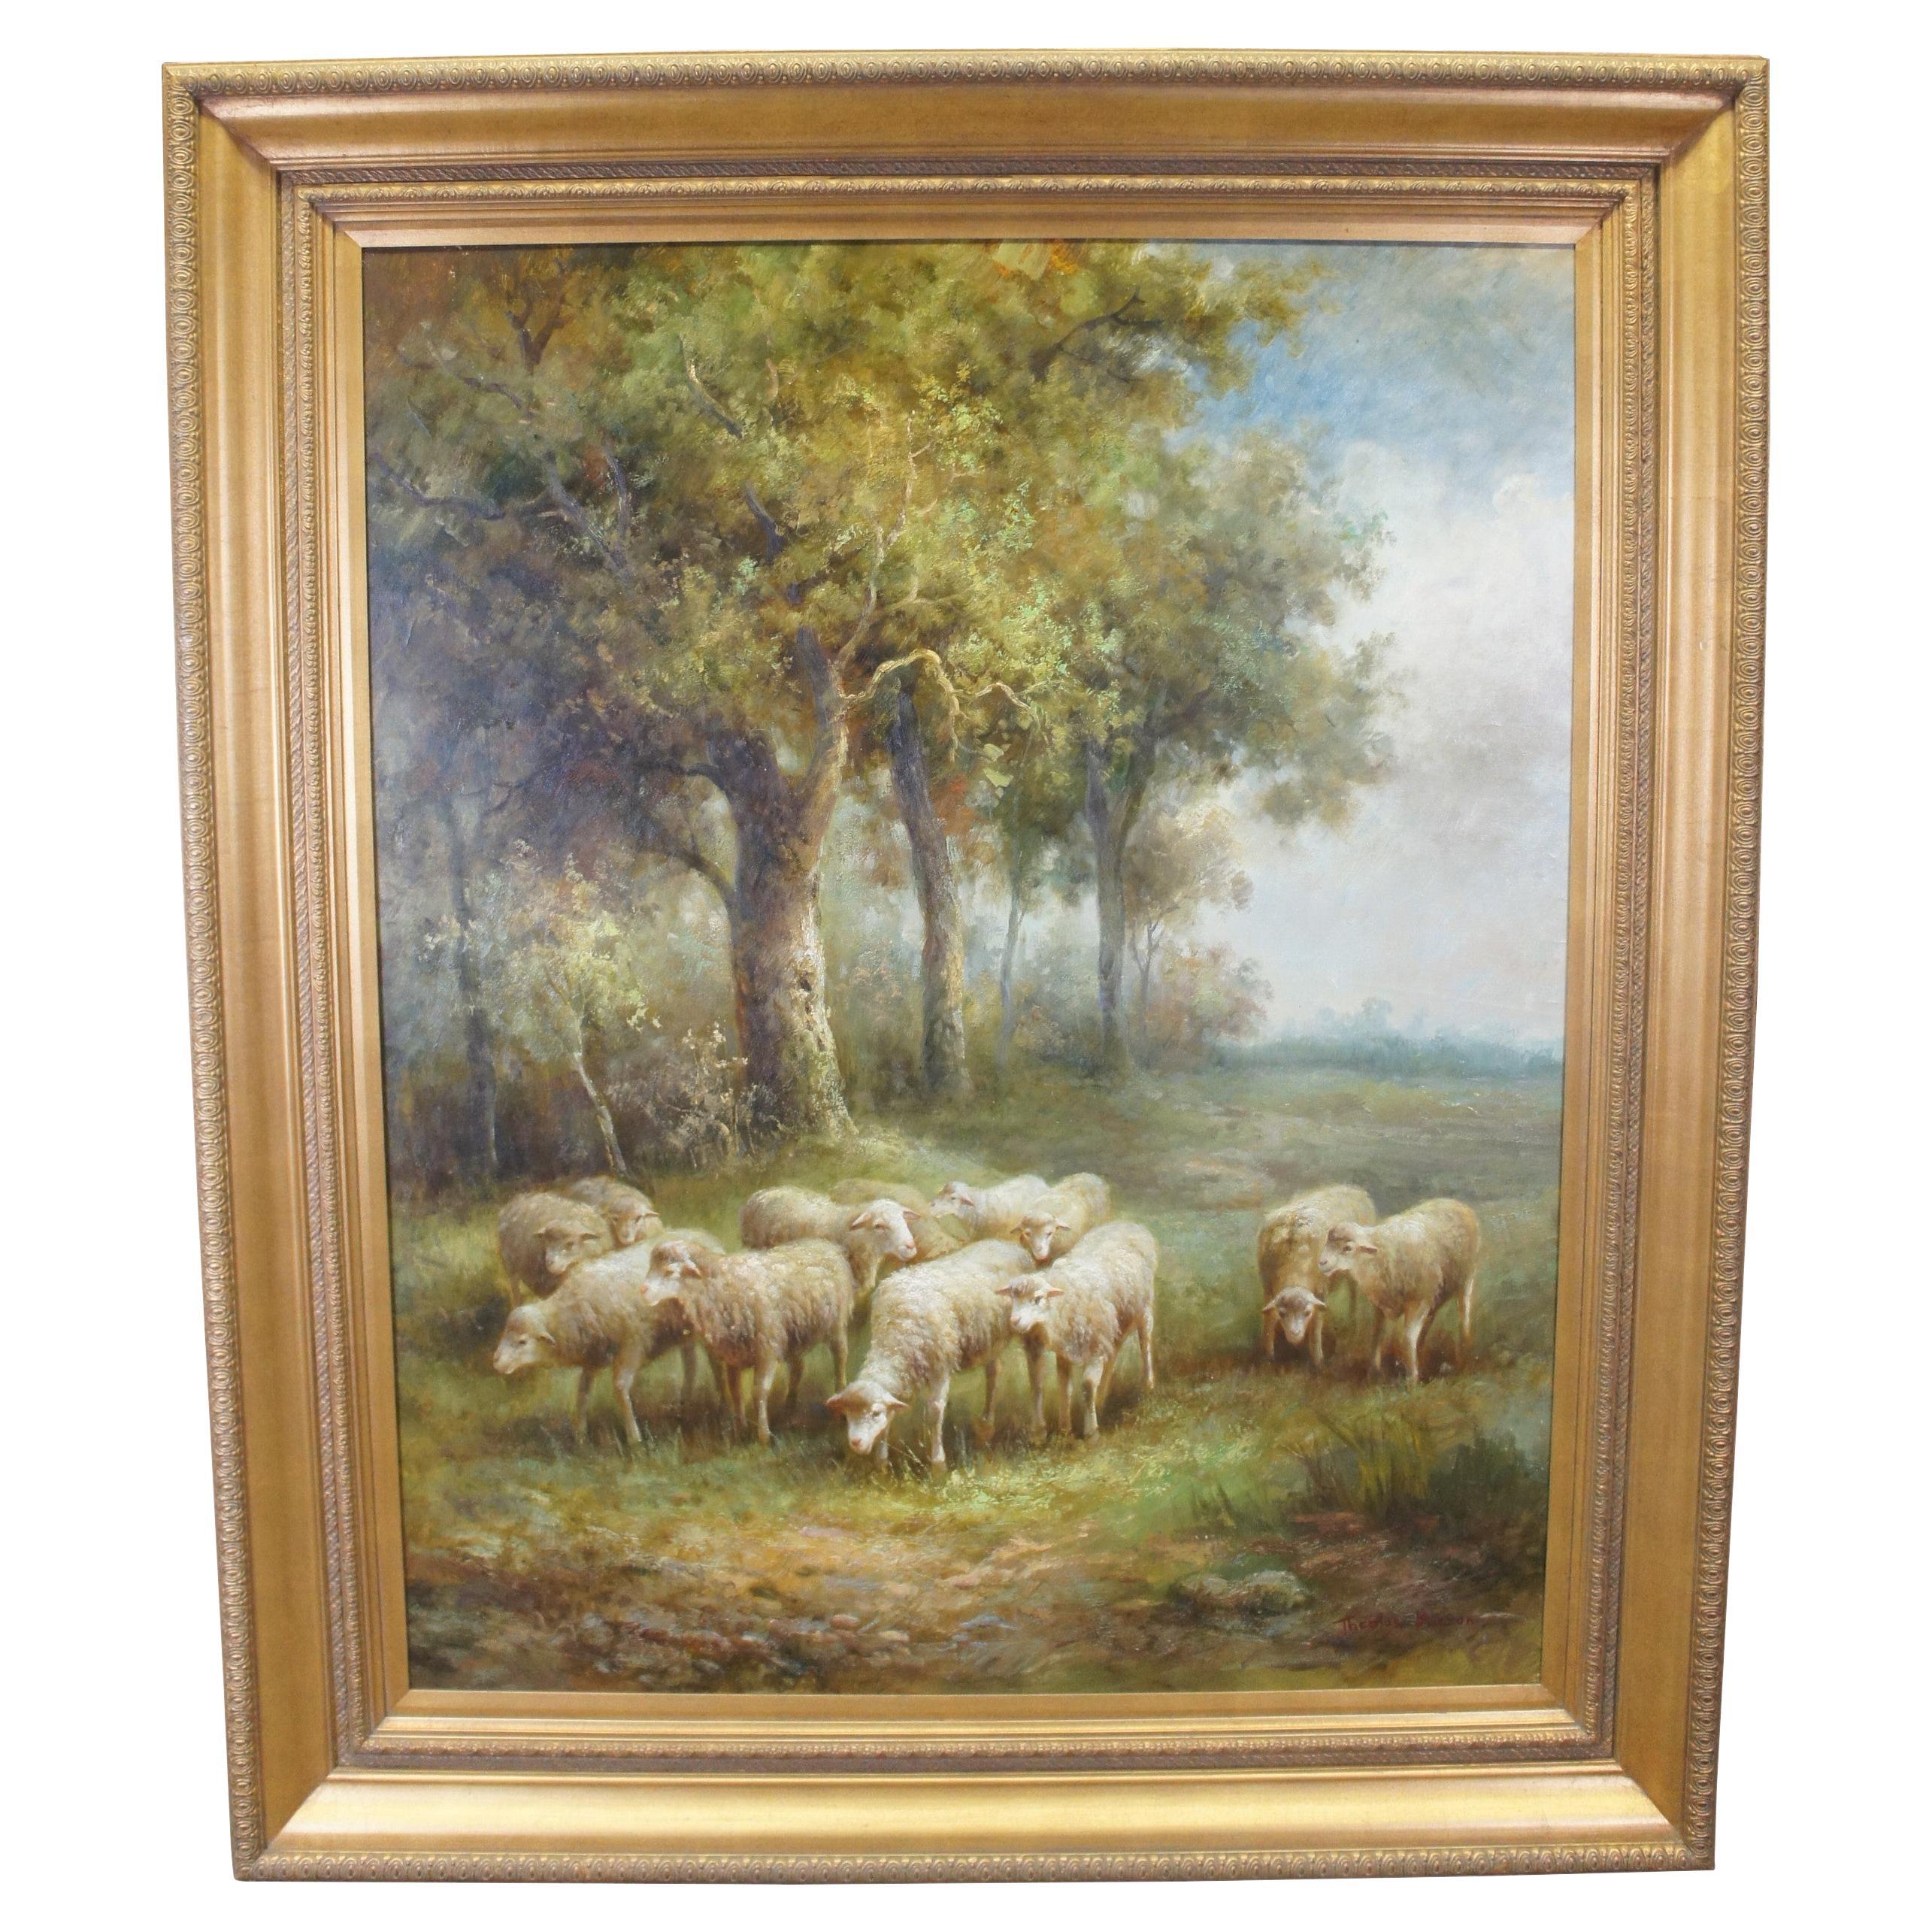 Monumental Thomas Barron Sheep Grazing Forest Landscape Oil Painting 75"